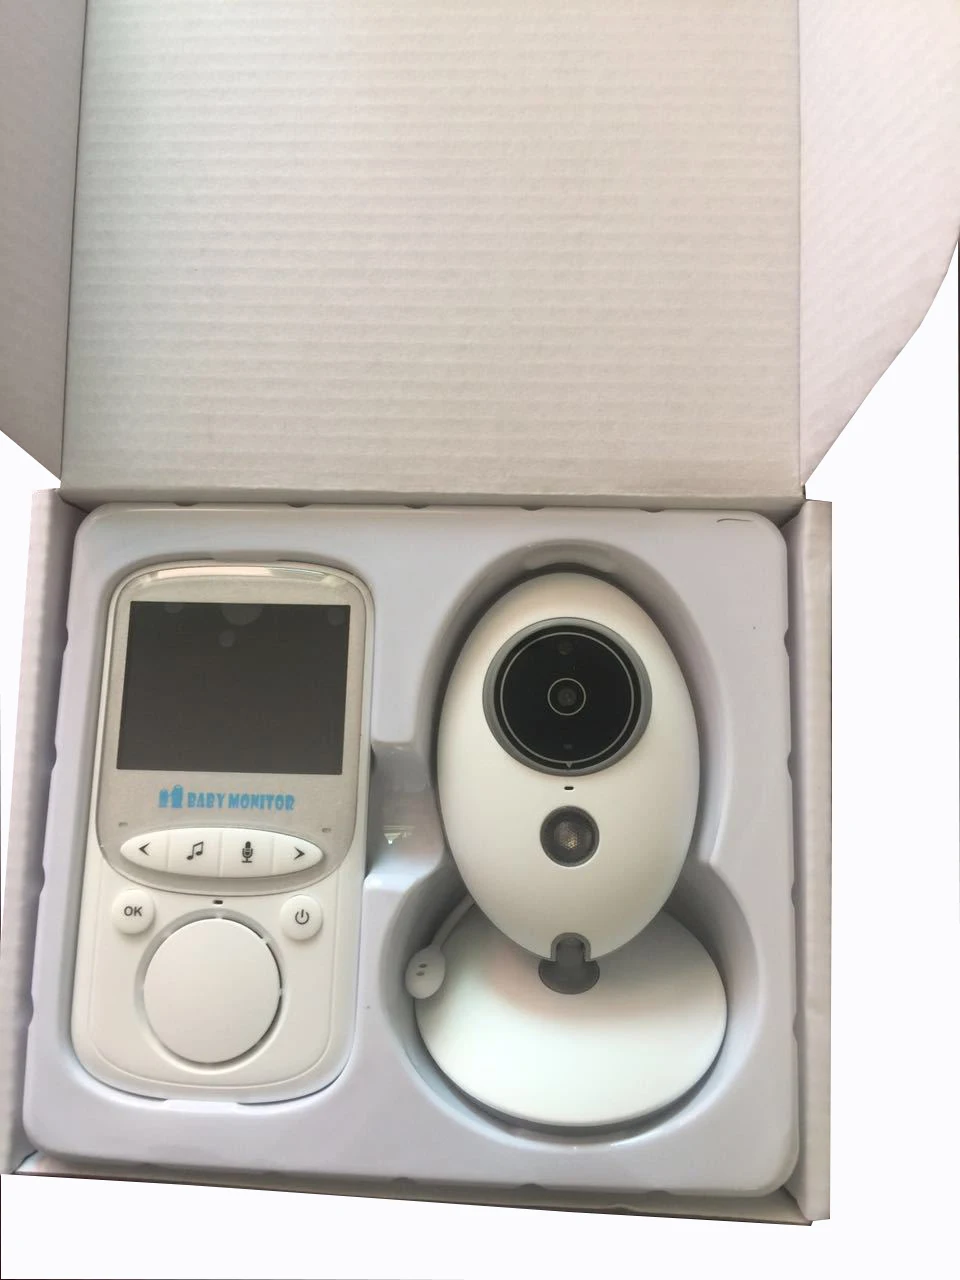 angelcare baby monitor app